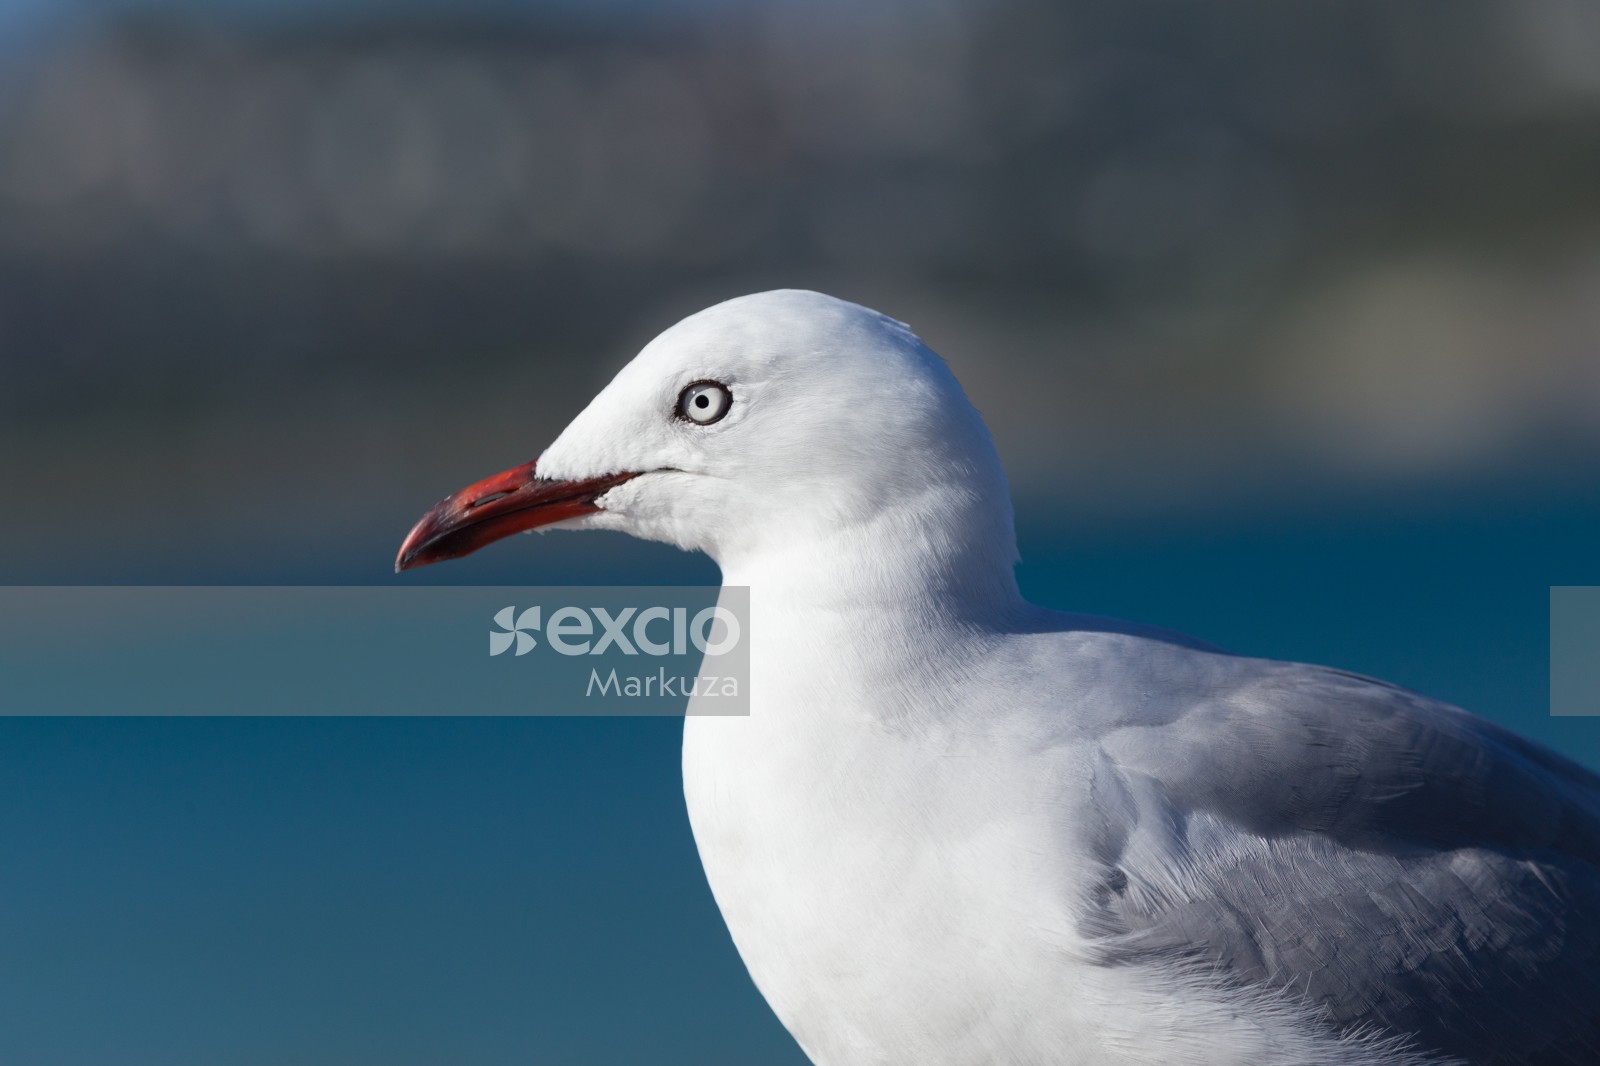 Seagull's white feathers and white eye